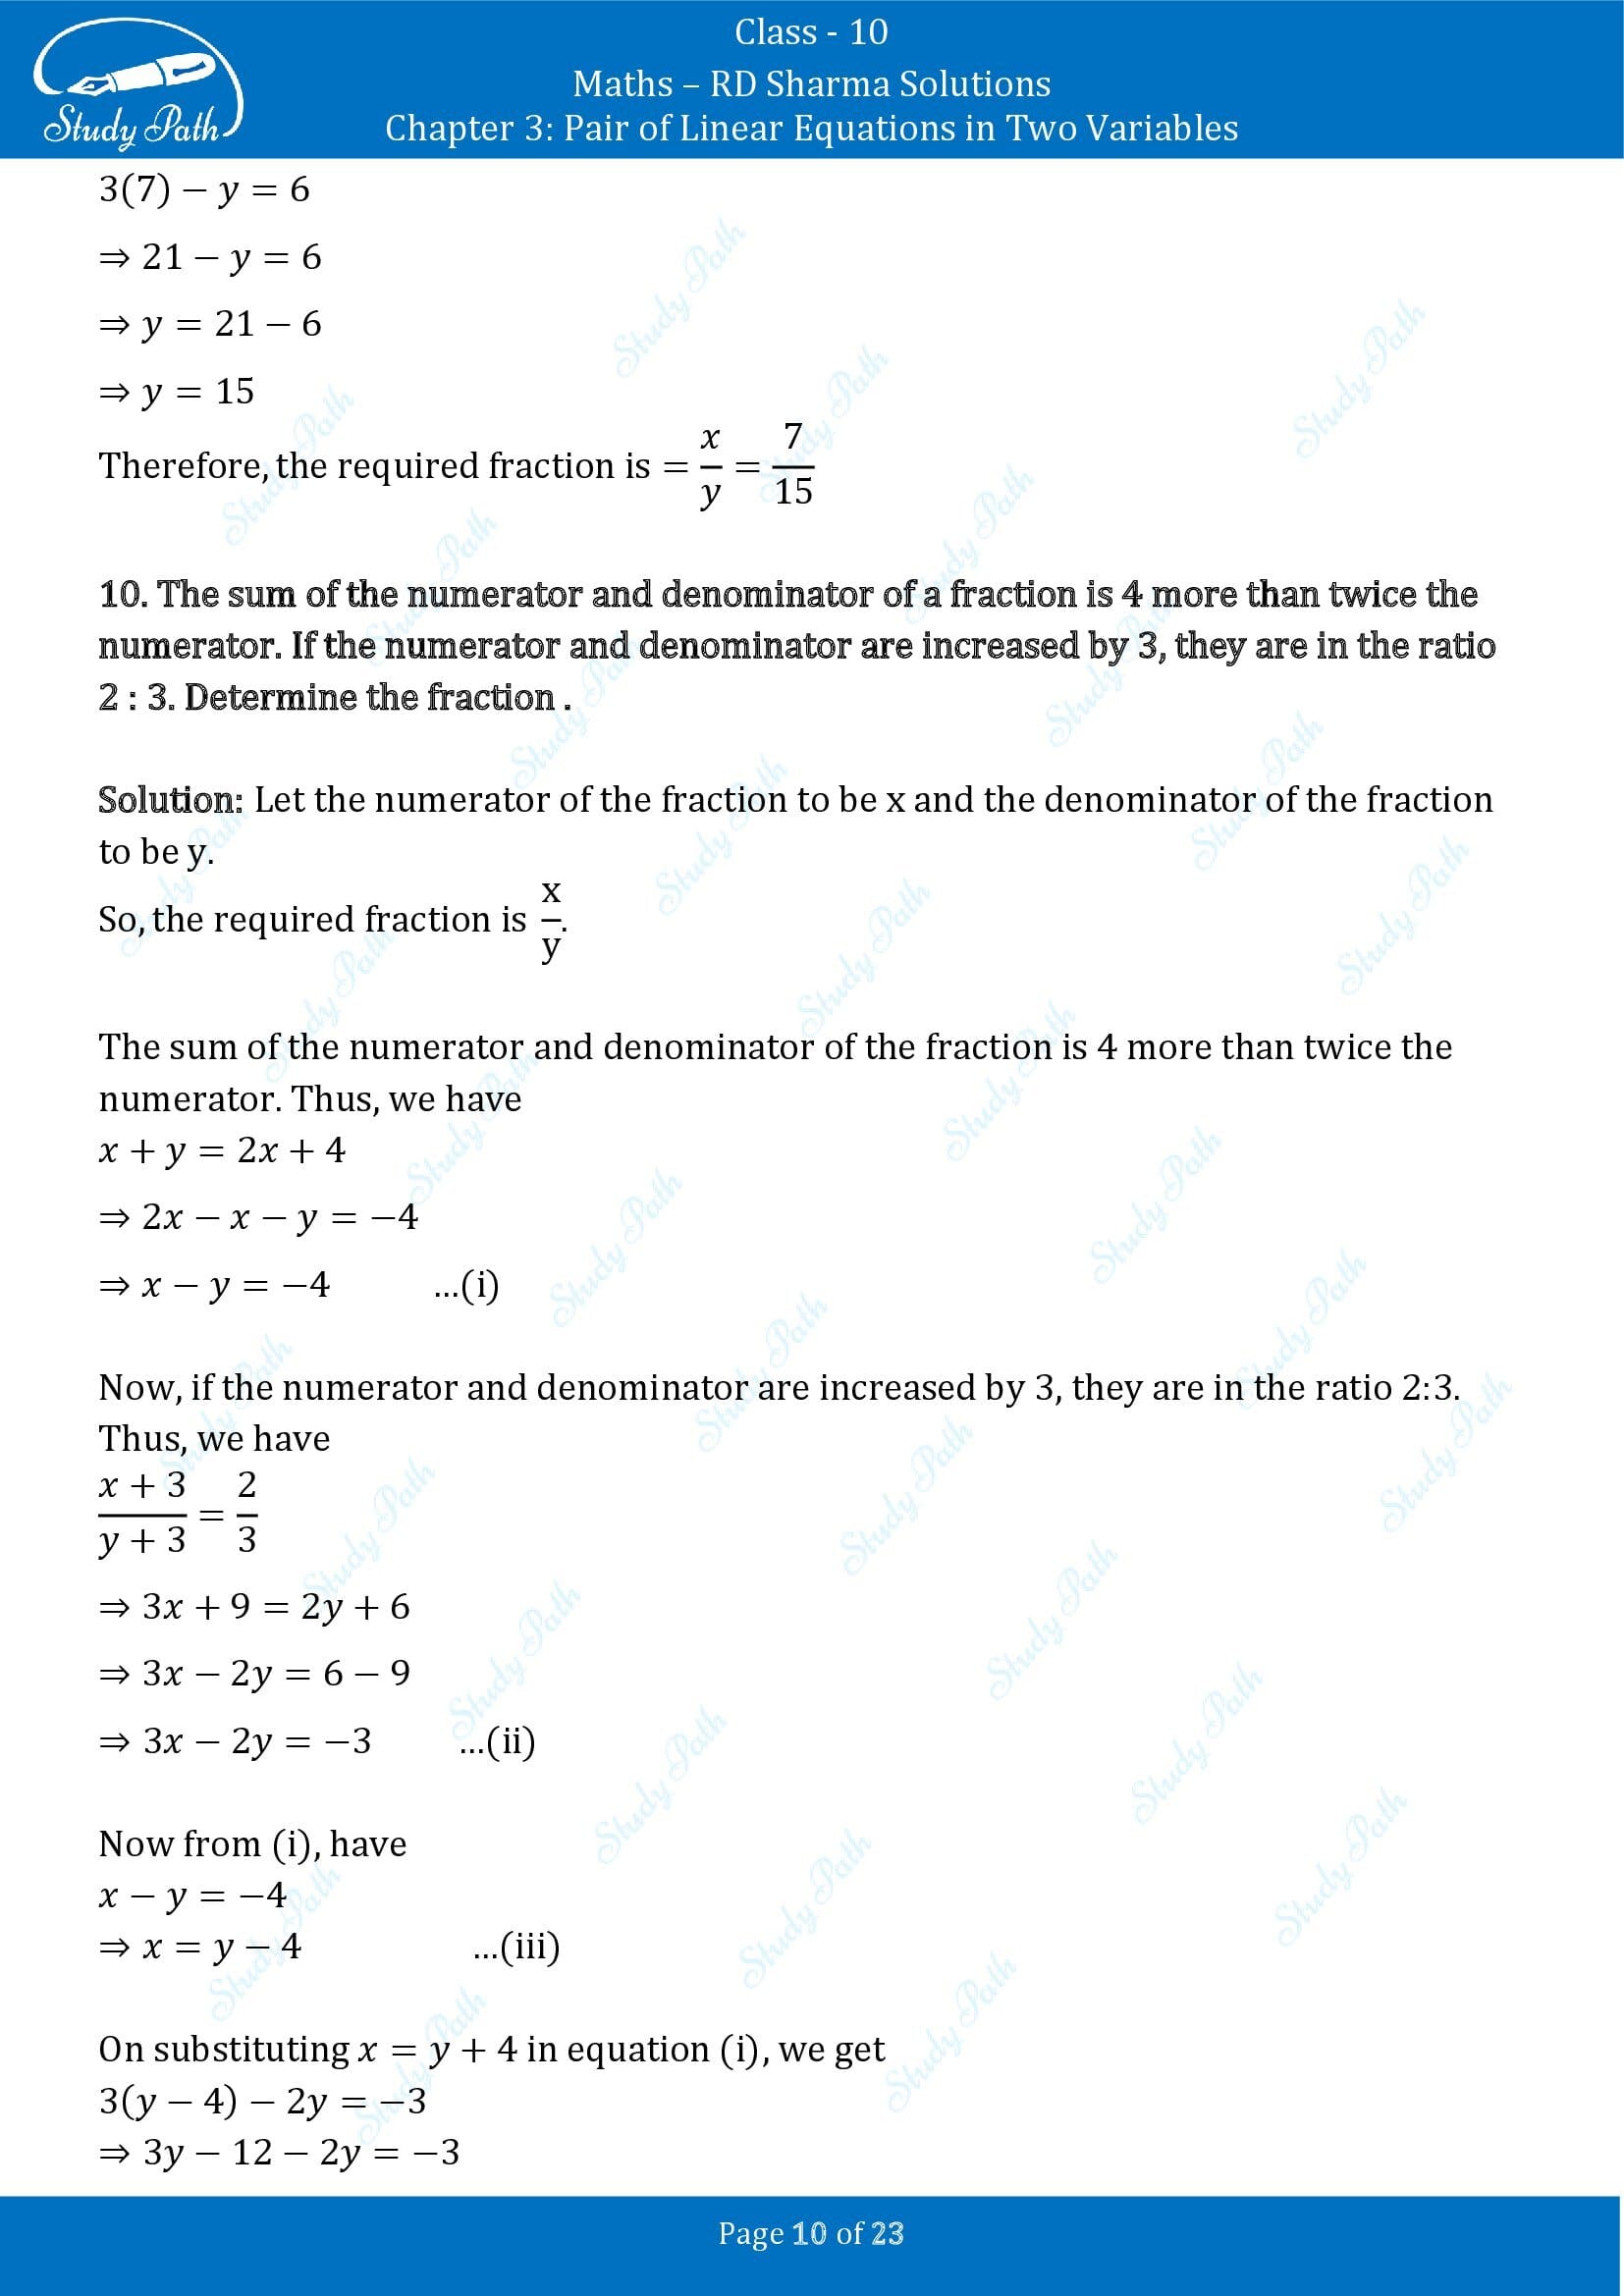 RD Sharma Solutions Class 10 Chapter 3 Pair of Linear Equations in Two Variables Exercise 3.8 00010